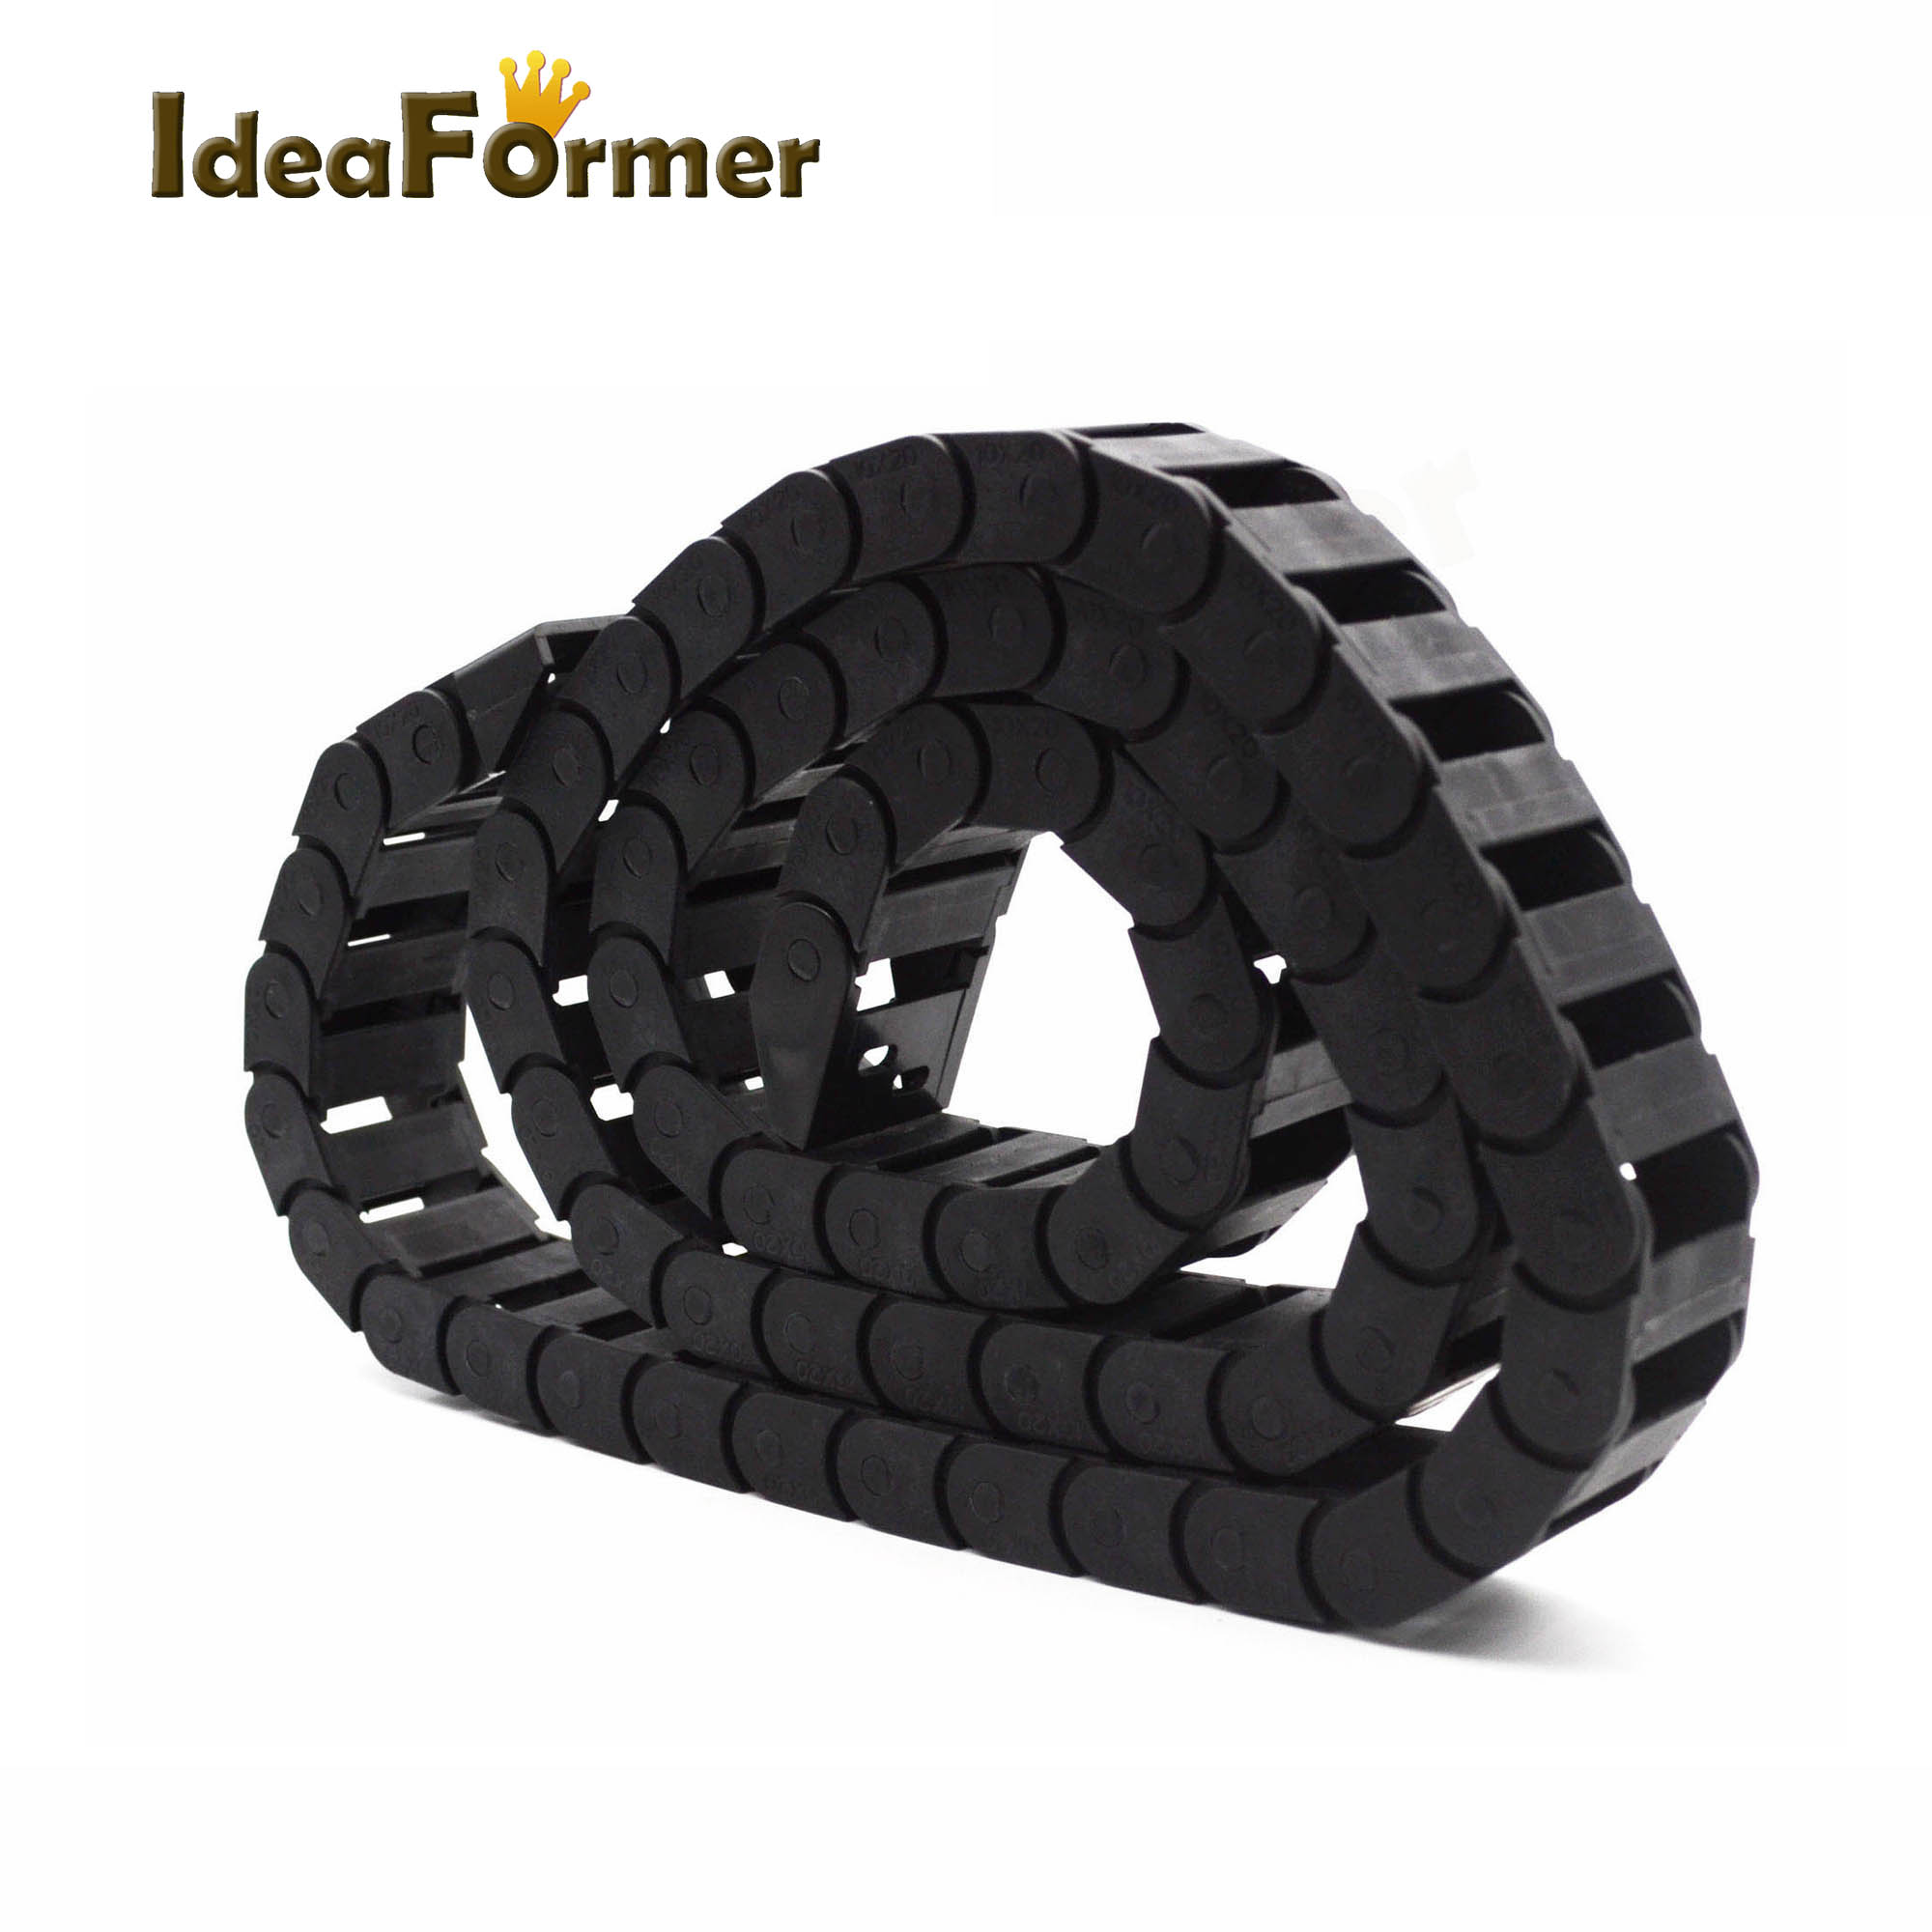 Towline Nylon drag chain black cable 7x7mm10x10/15/20/30MM 3D printer parts in stock for sale ideaformer